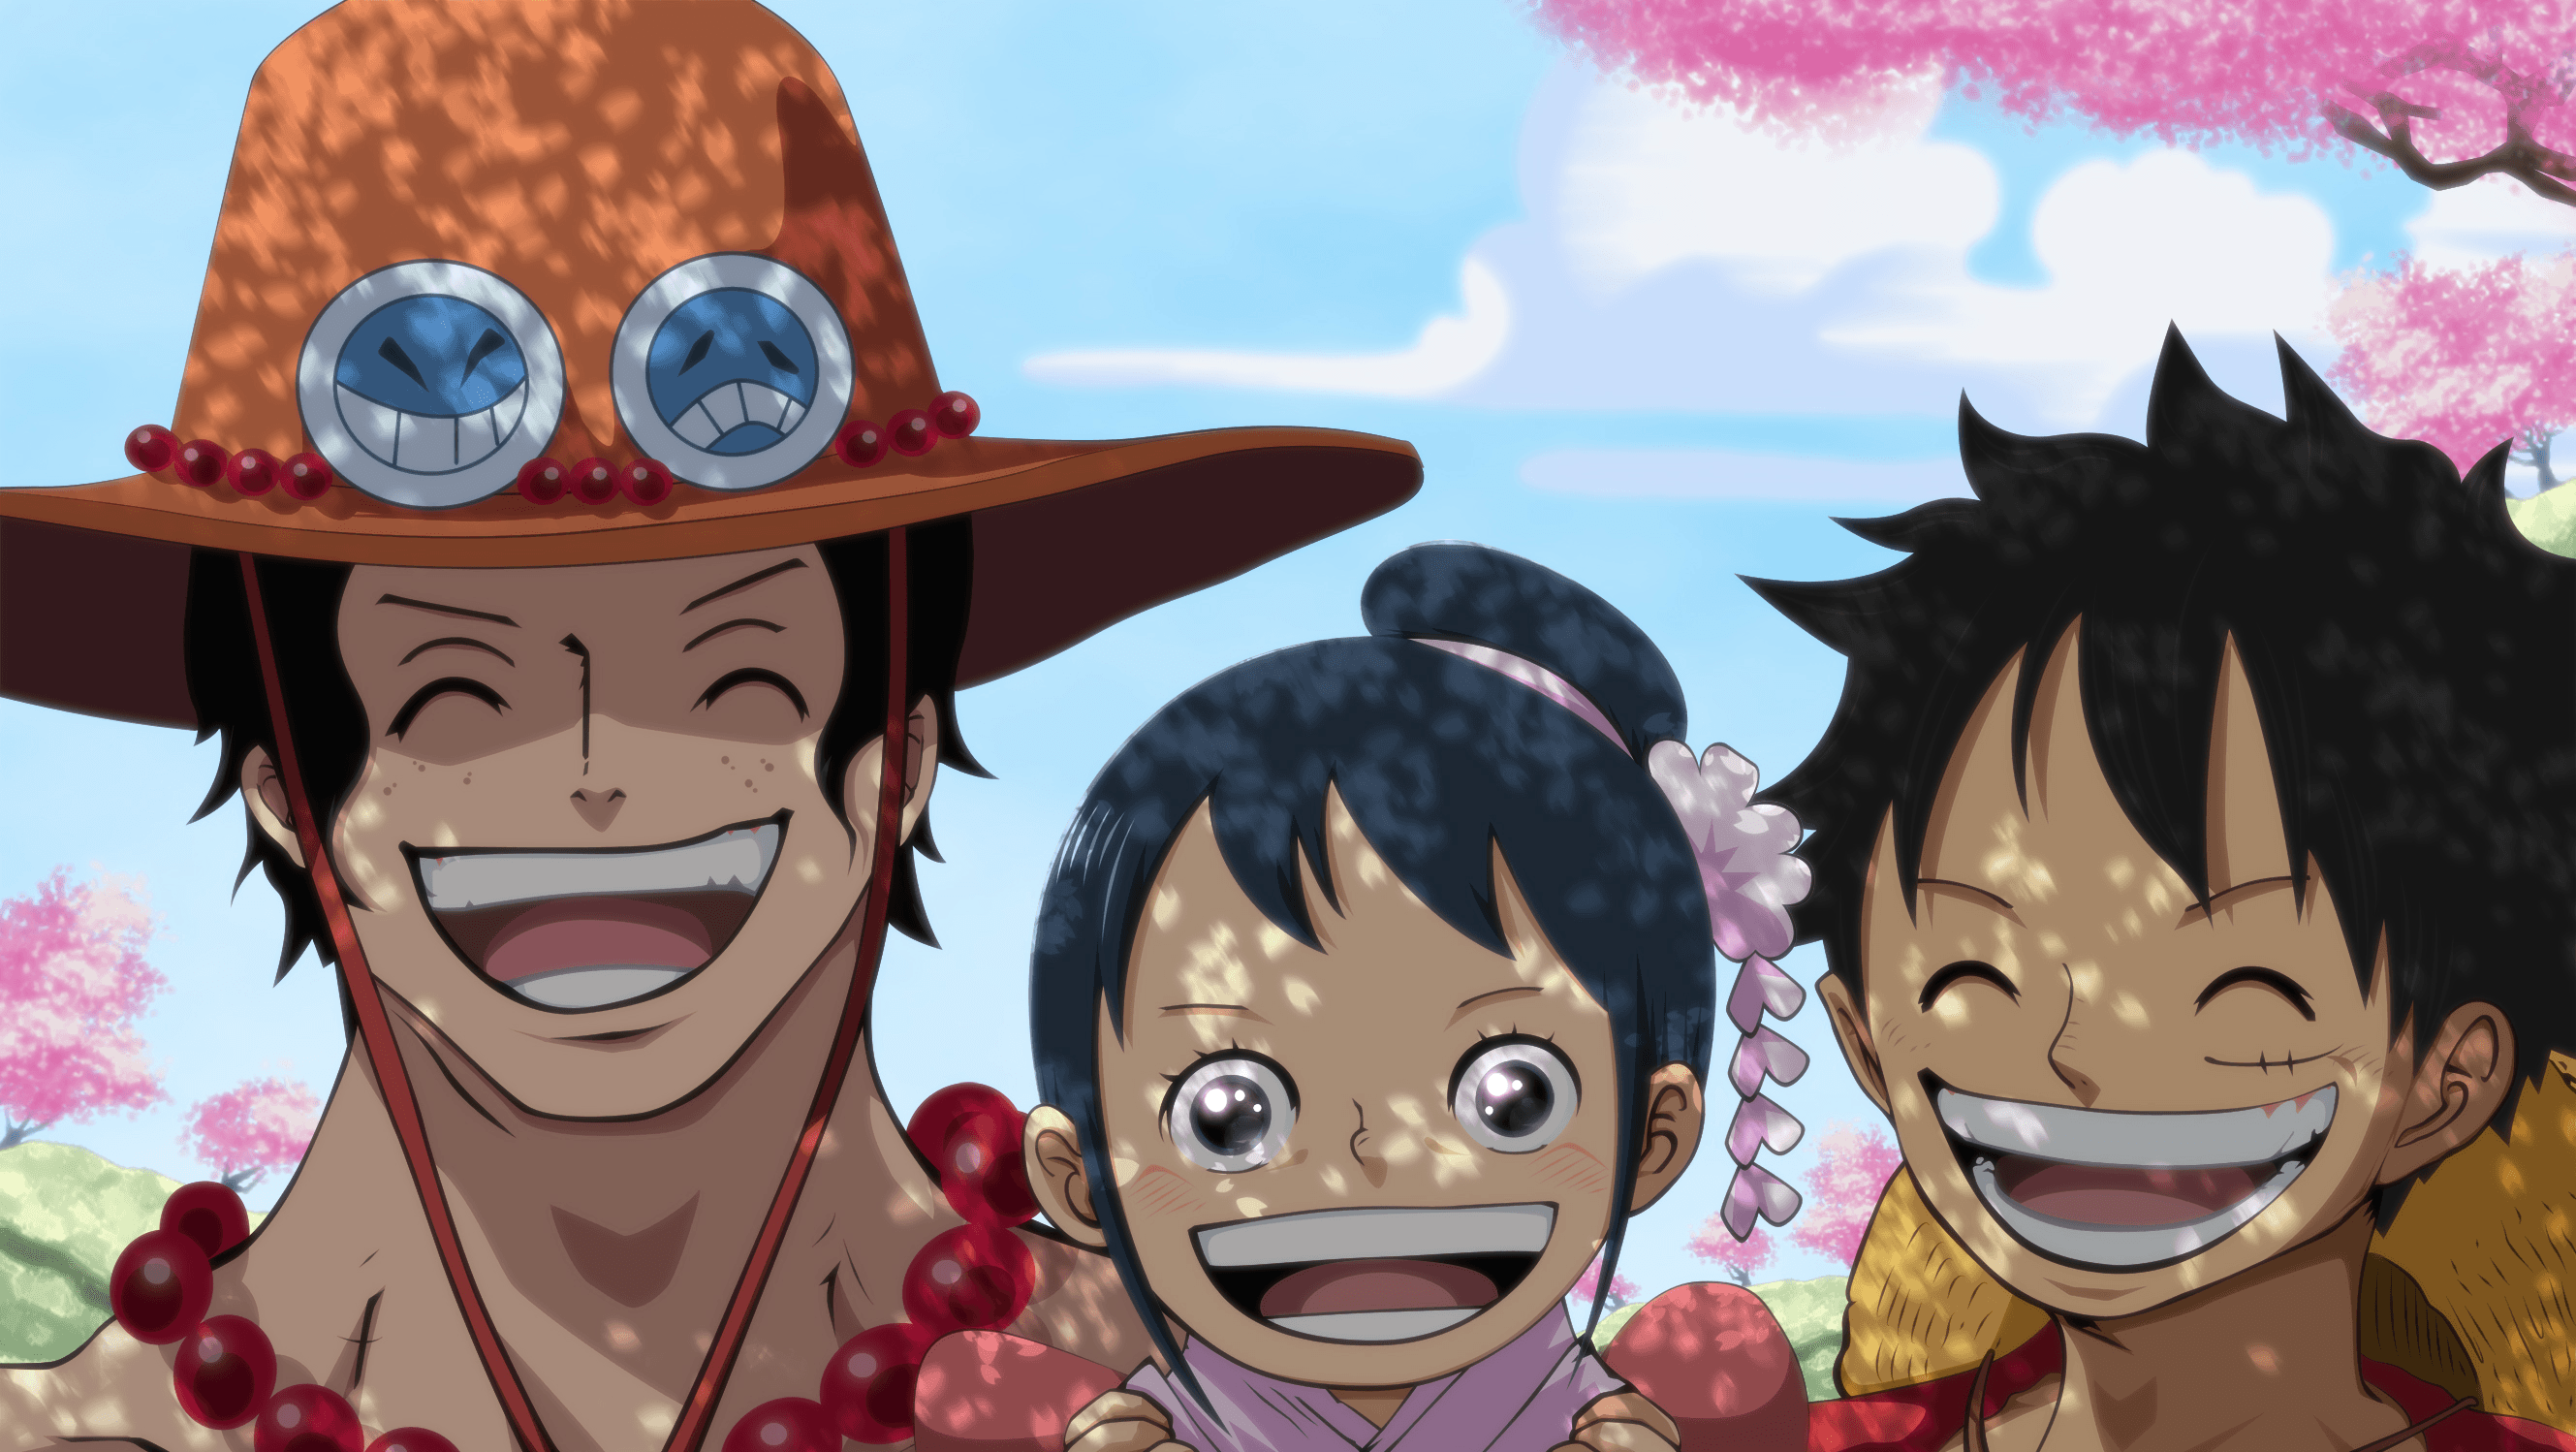 Ace and Luffy Wallpapers.